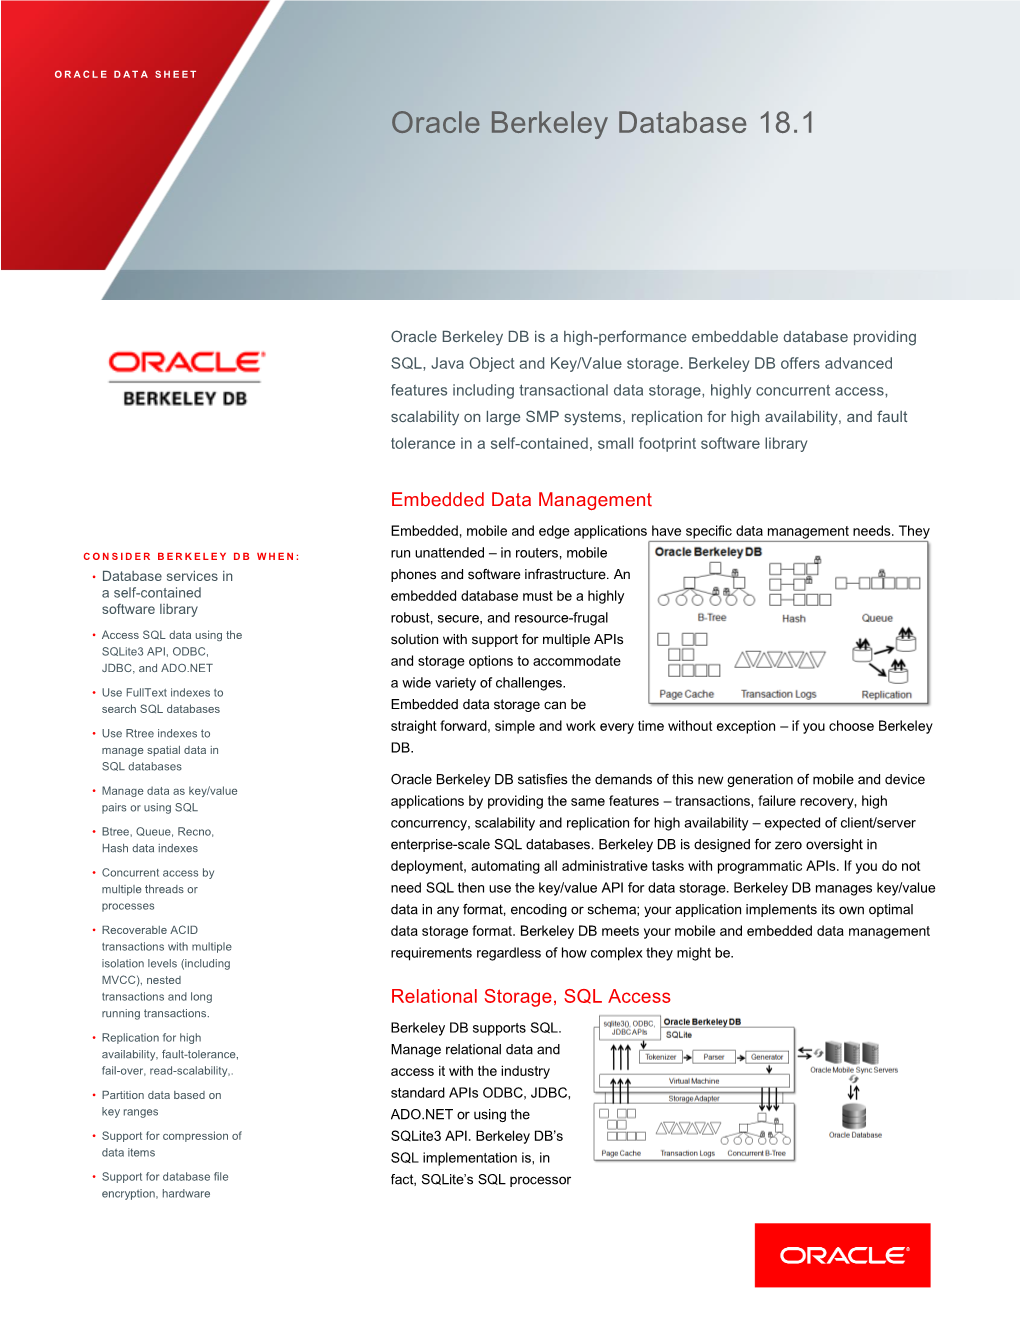 Oracle Berkeley DB Is a High-Performance Embeddable Database Providing SQL, Java Object and Key/Value Storage